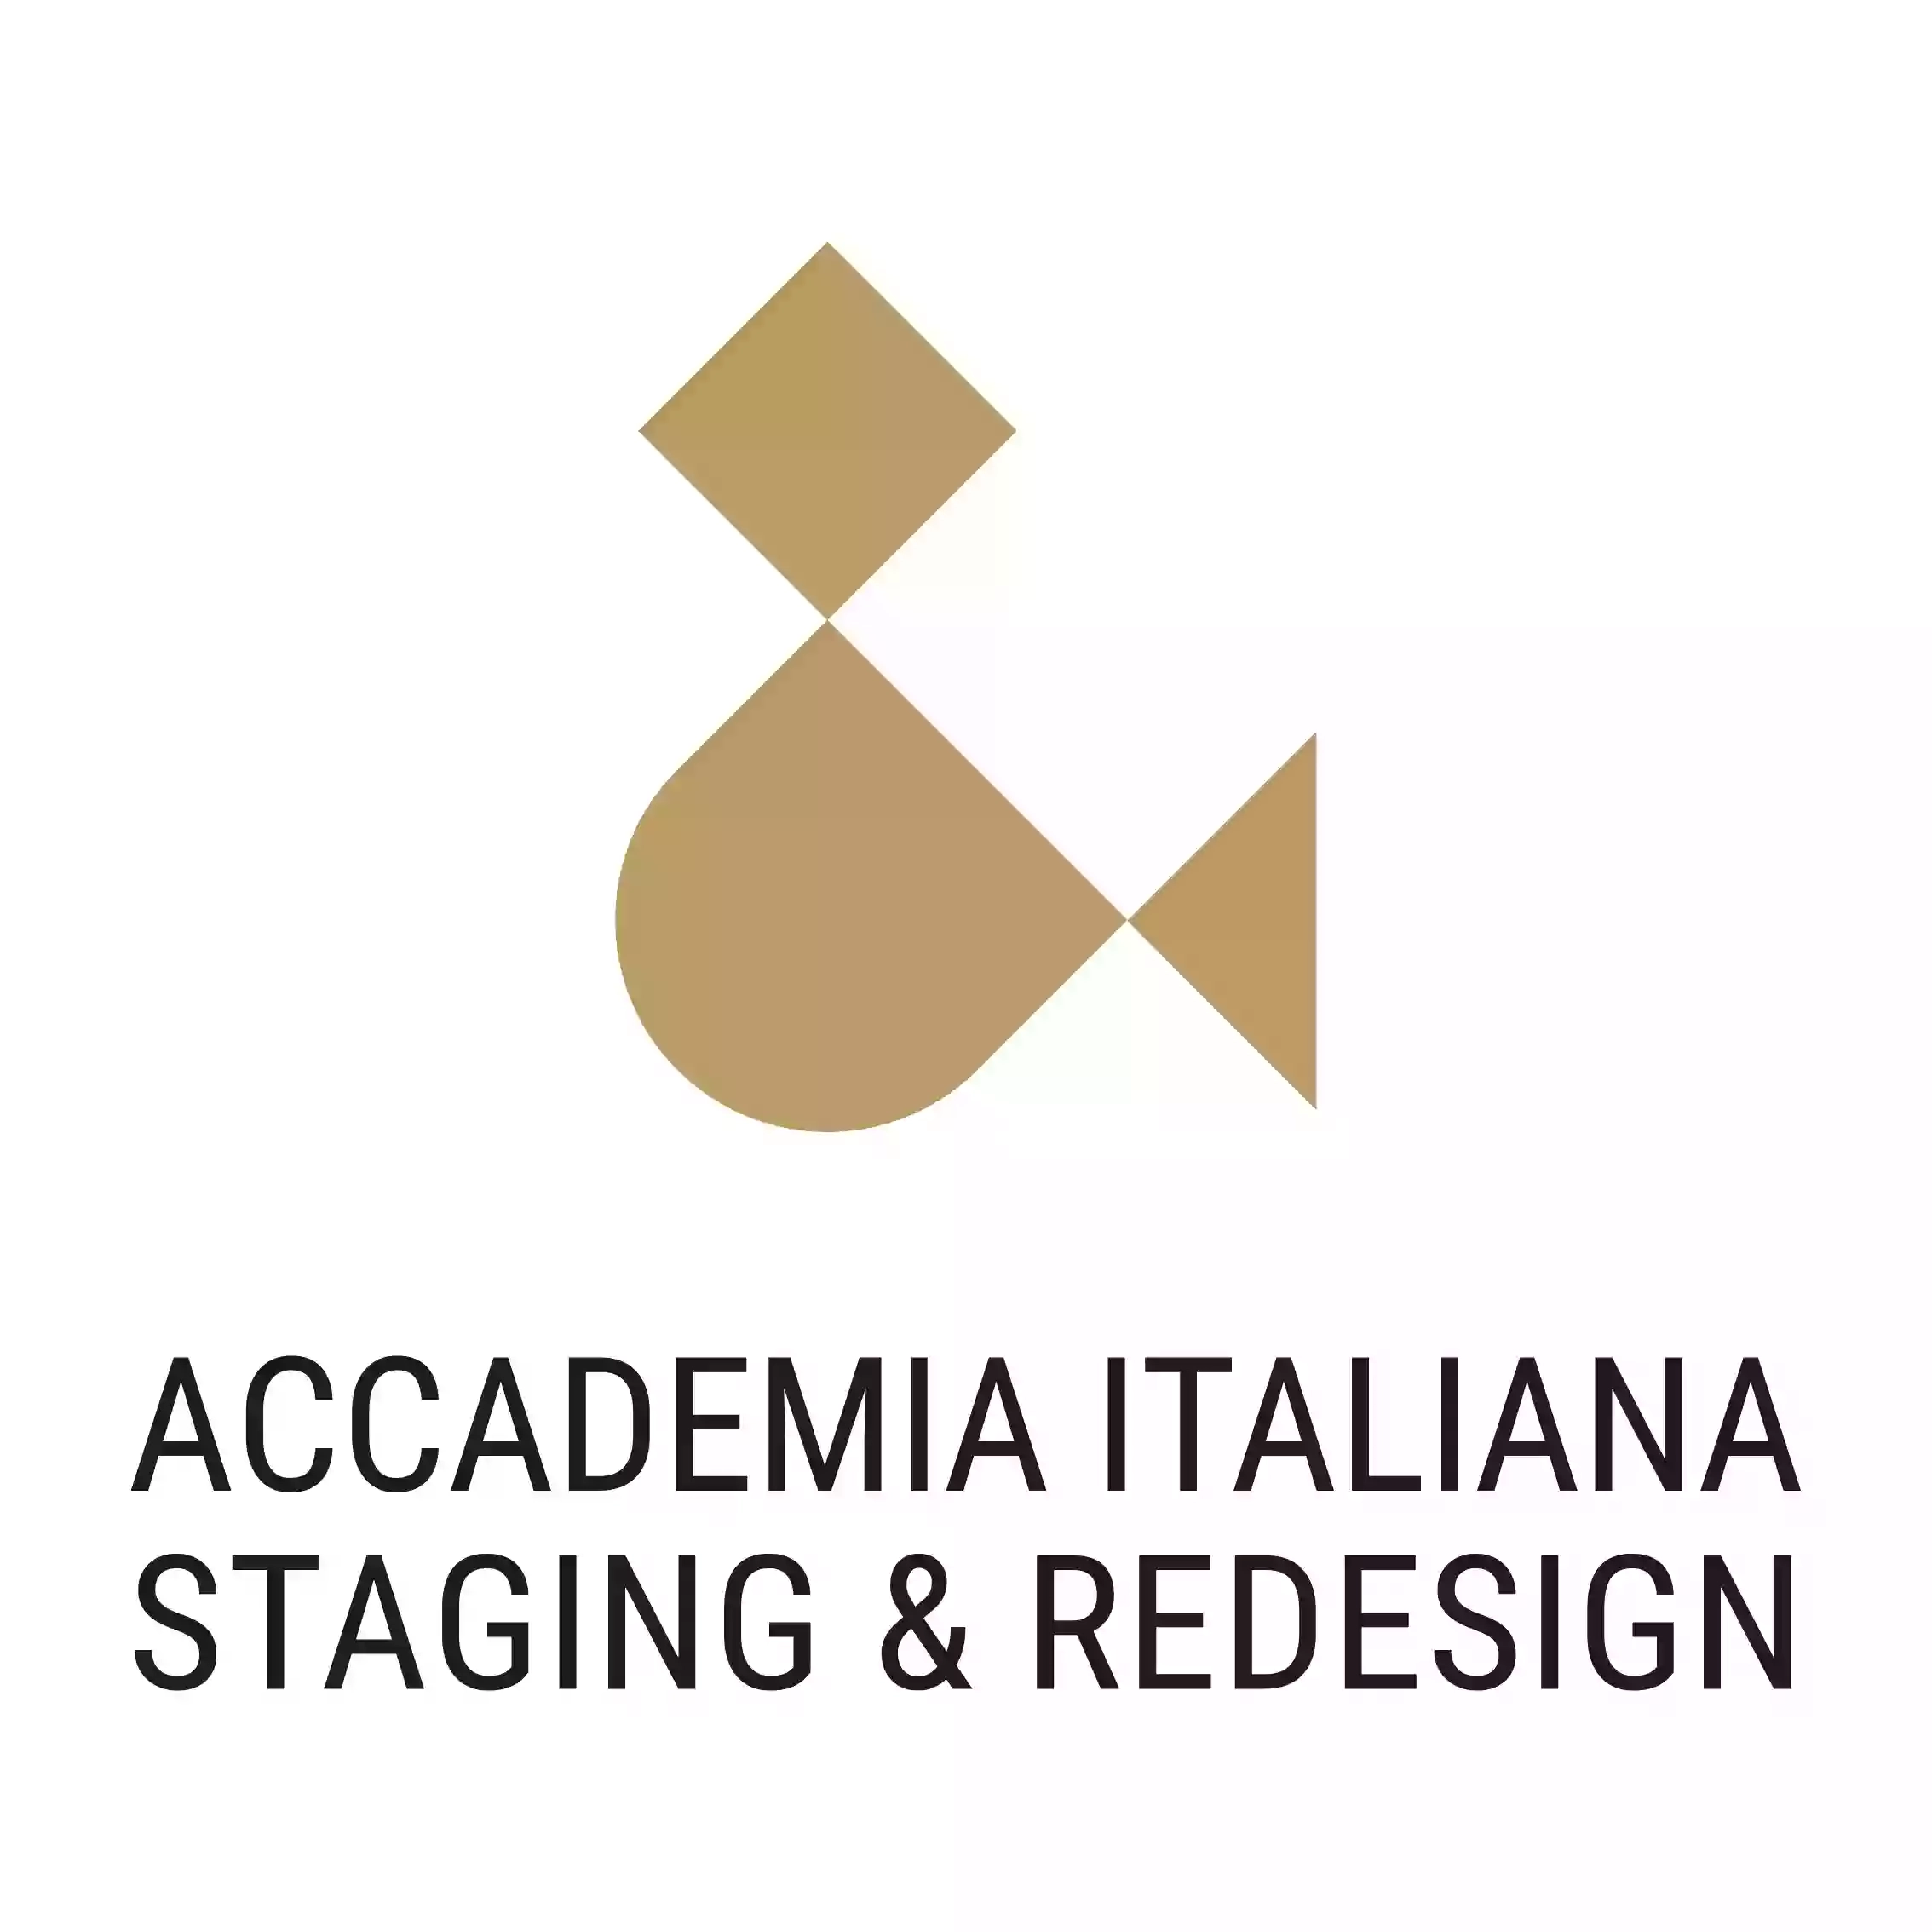 Accademia Italiana Staging & ReDesign